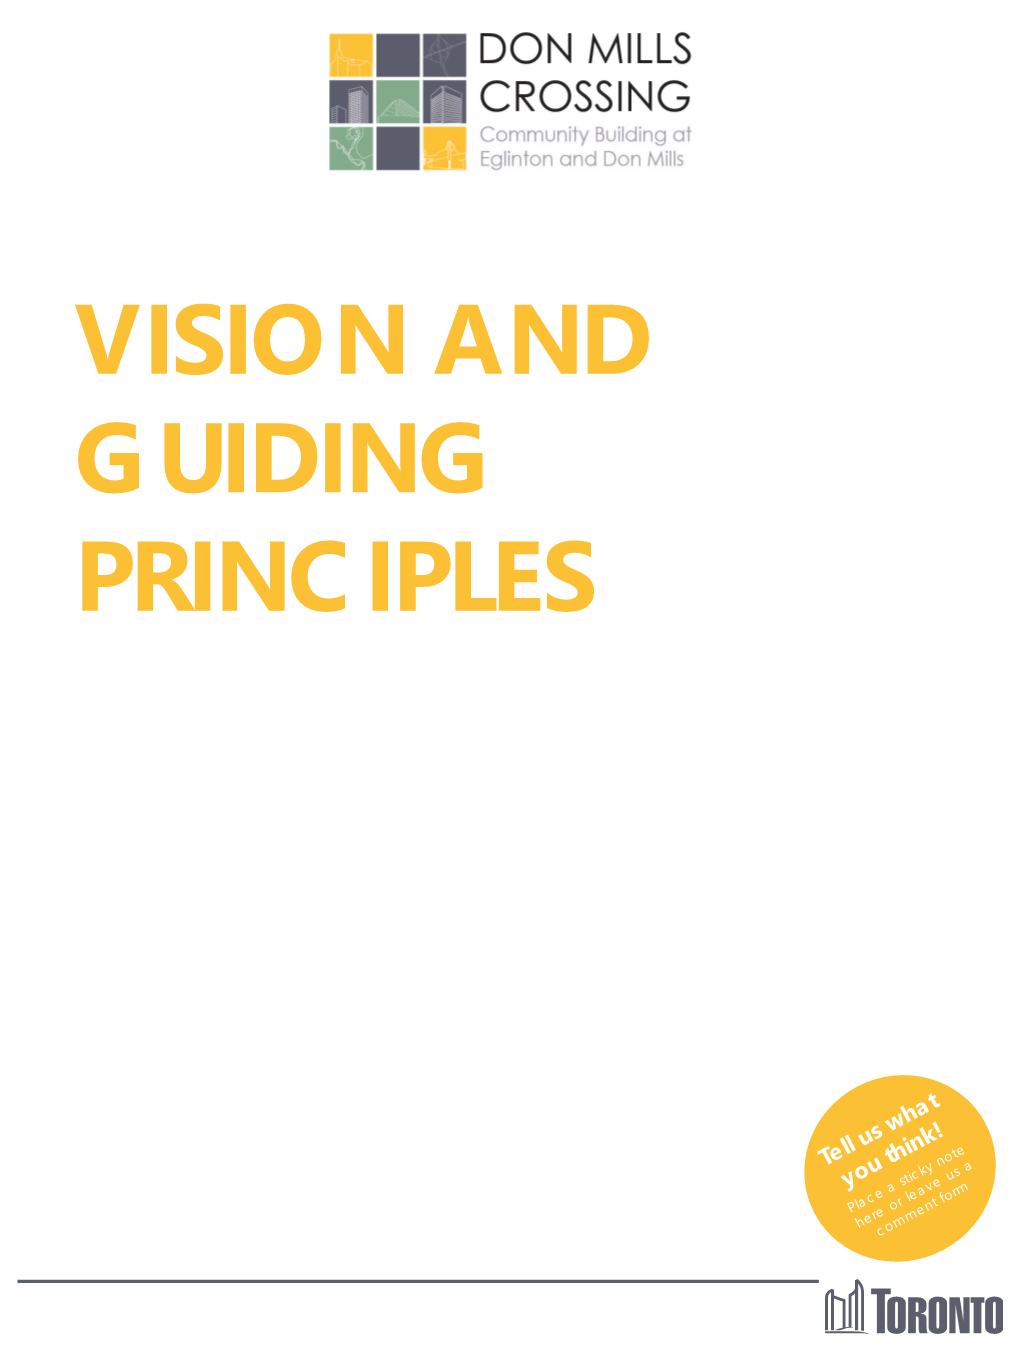 Vision and Guiding Principles